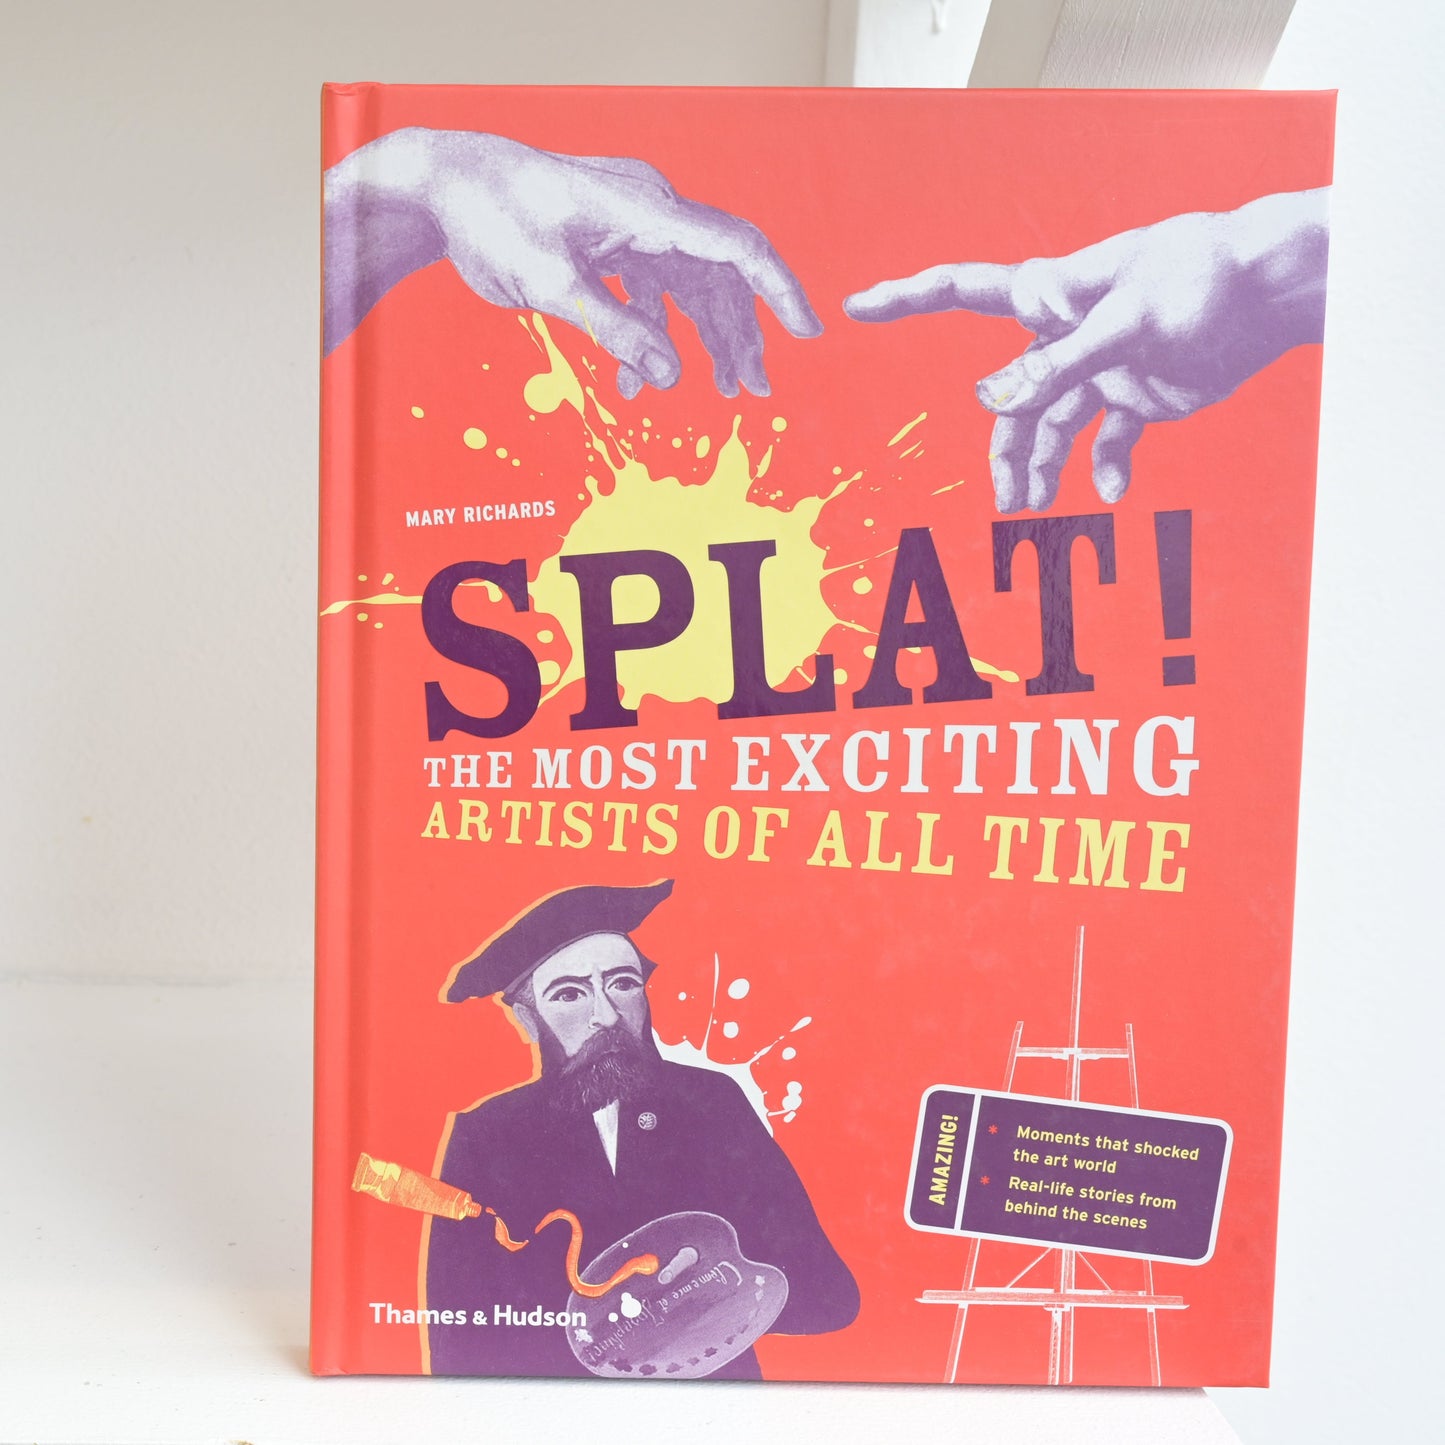 Splat! : The most exciting artists of all time